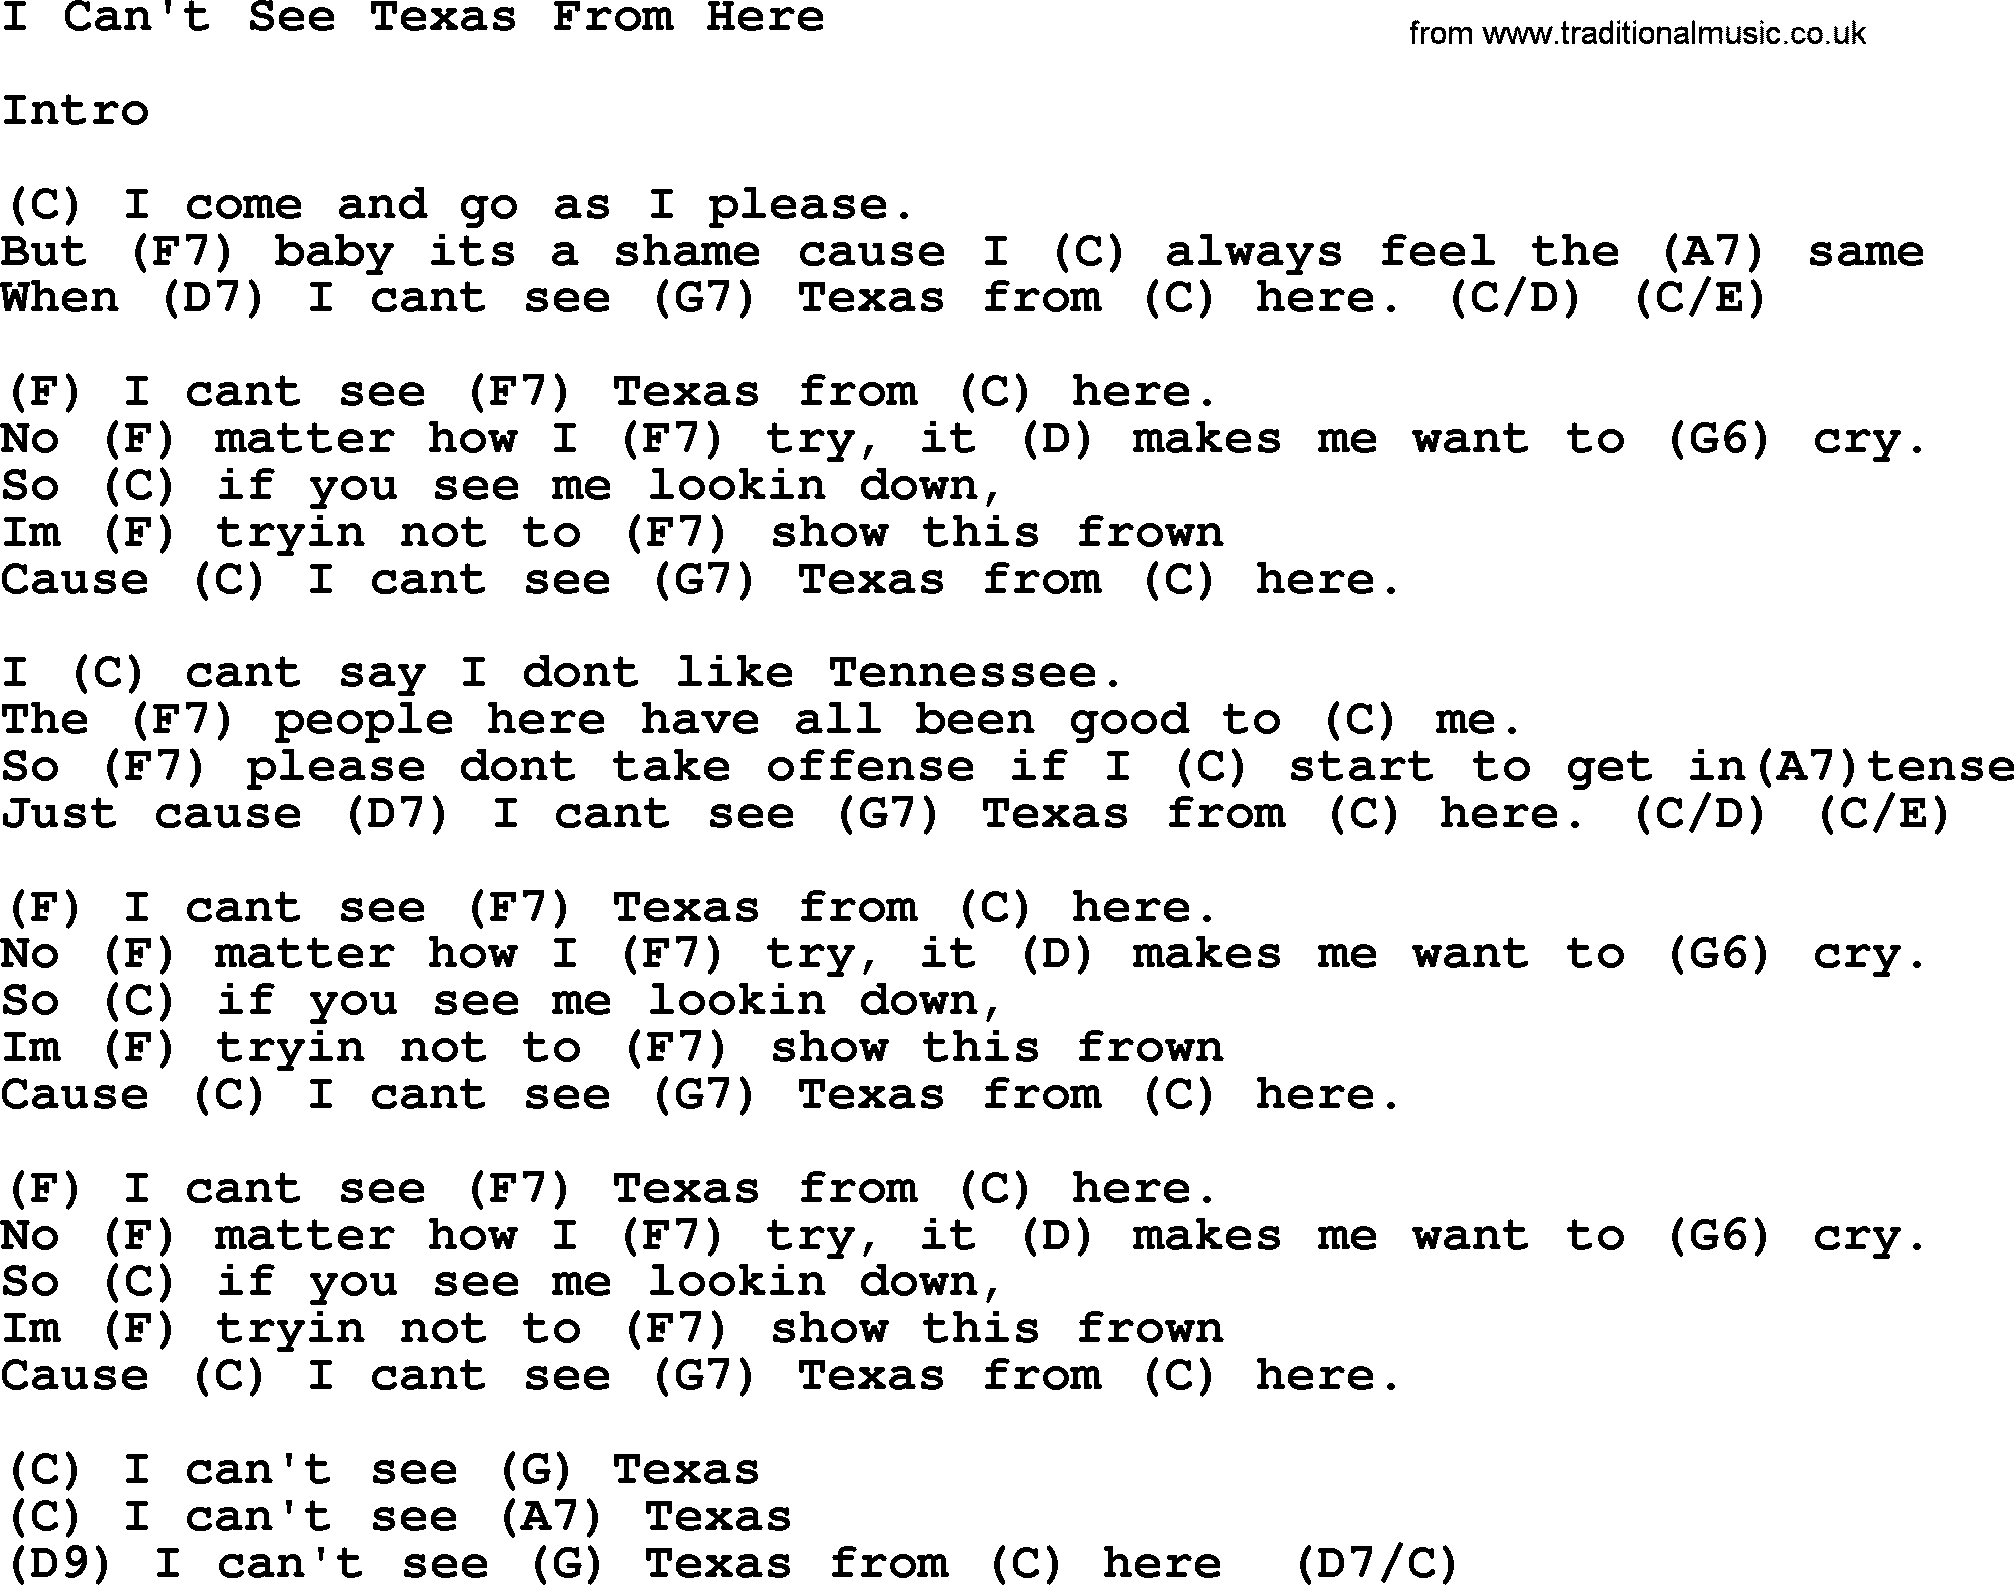 George Strait song: I Can't See Texas From Here, lyrics and chords